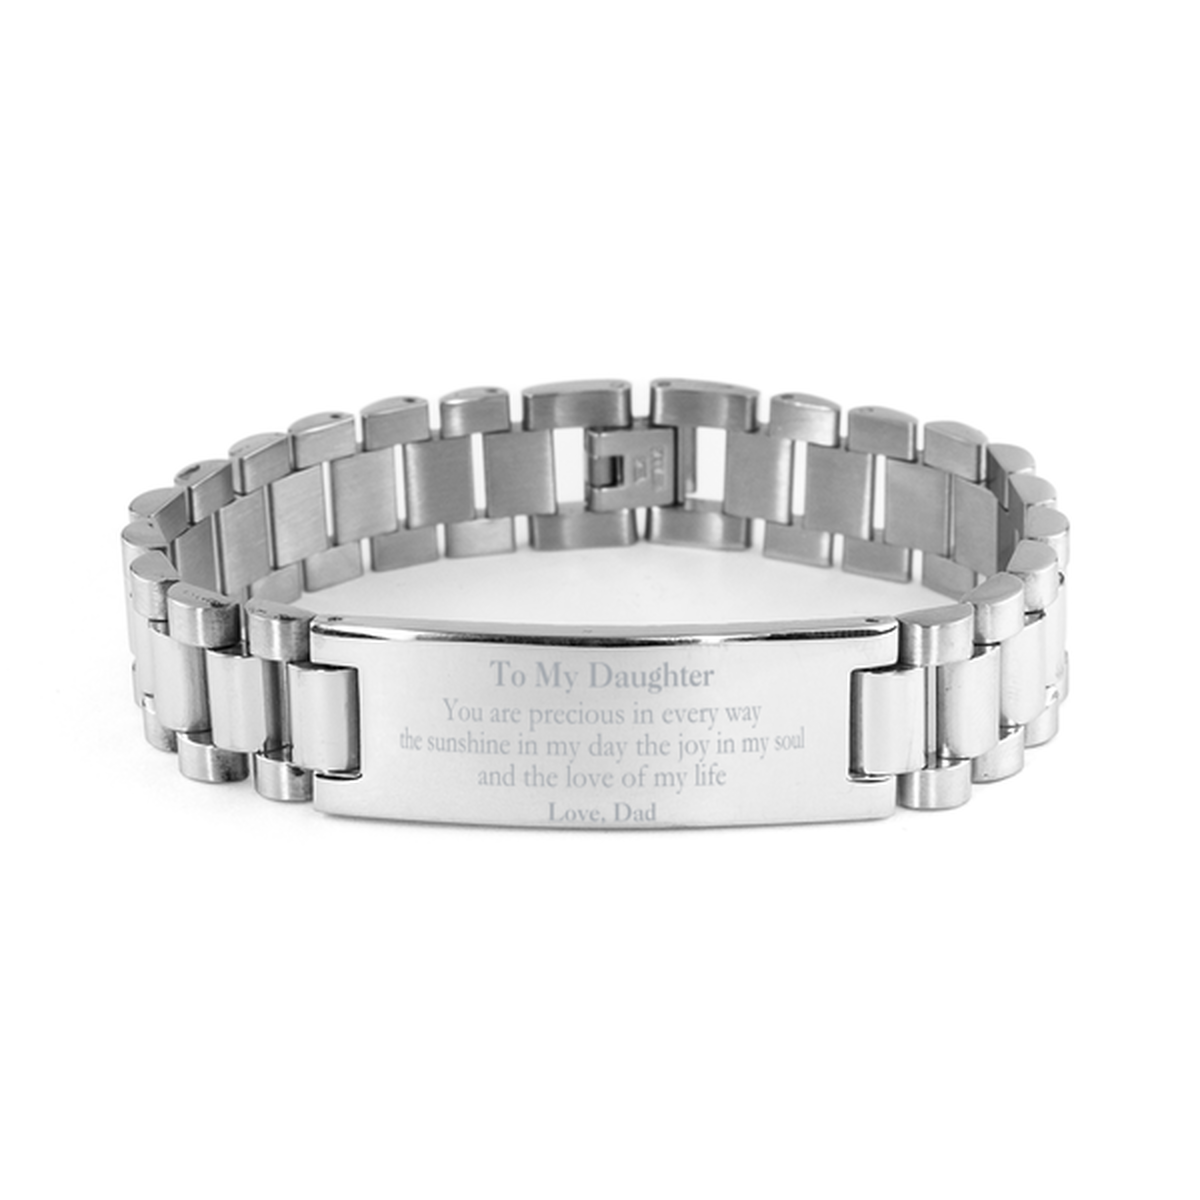 Graduation Gifts for Daughter Ladder Stainless Steel Bracelet Present from Dad, Christmas Daughter Birthday Gifts Daughter You are precious in every way the sunshine in my day. Love, Dad